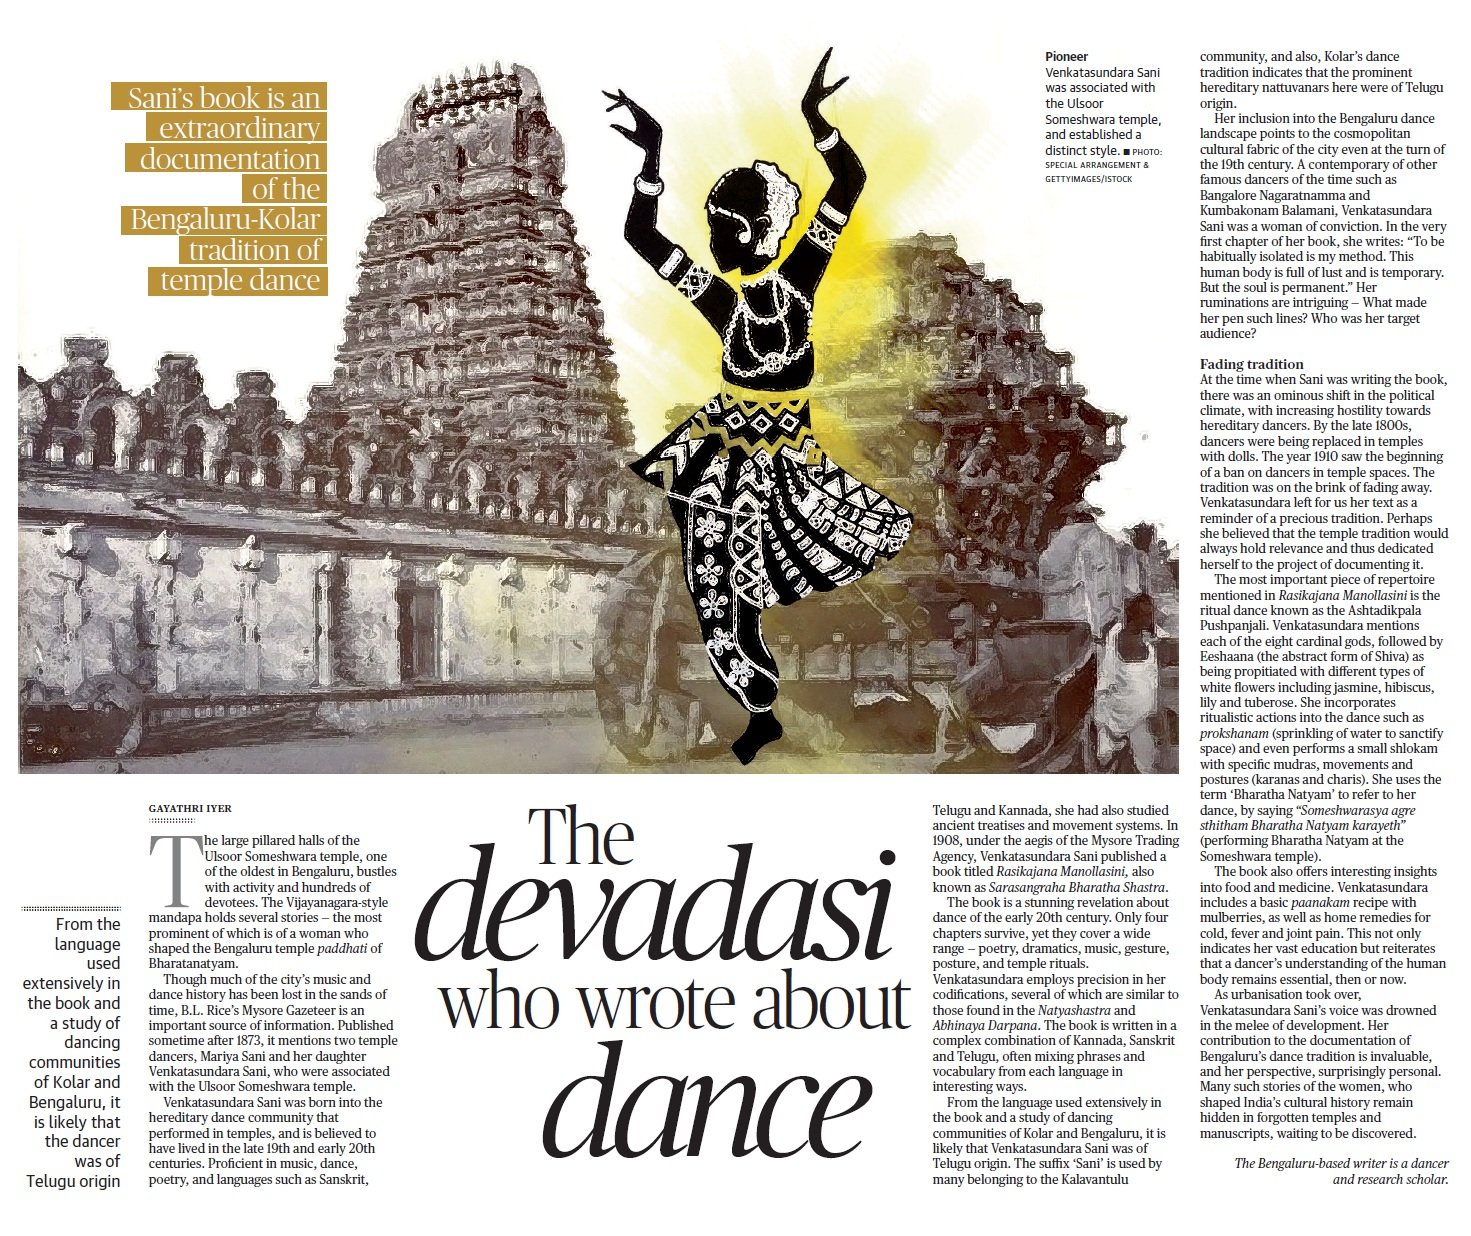 The devadasi who wrote about dance - Gayathri Iyer